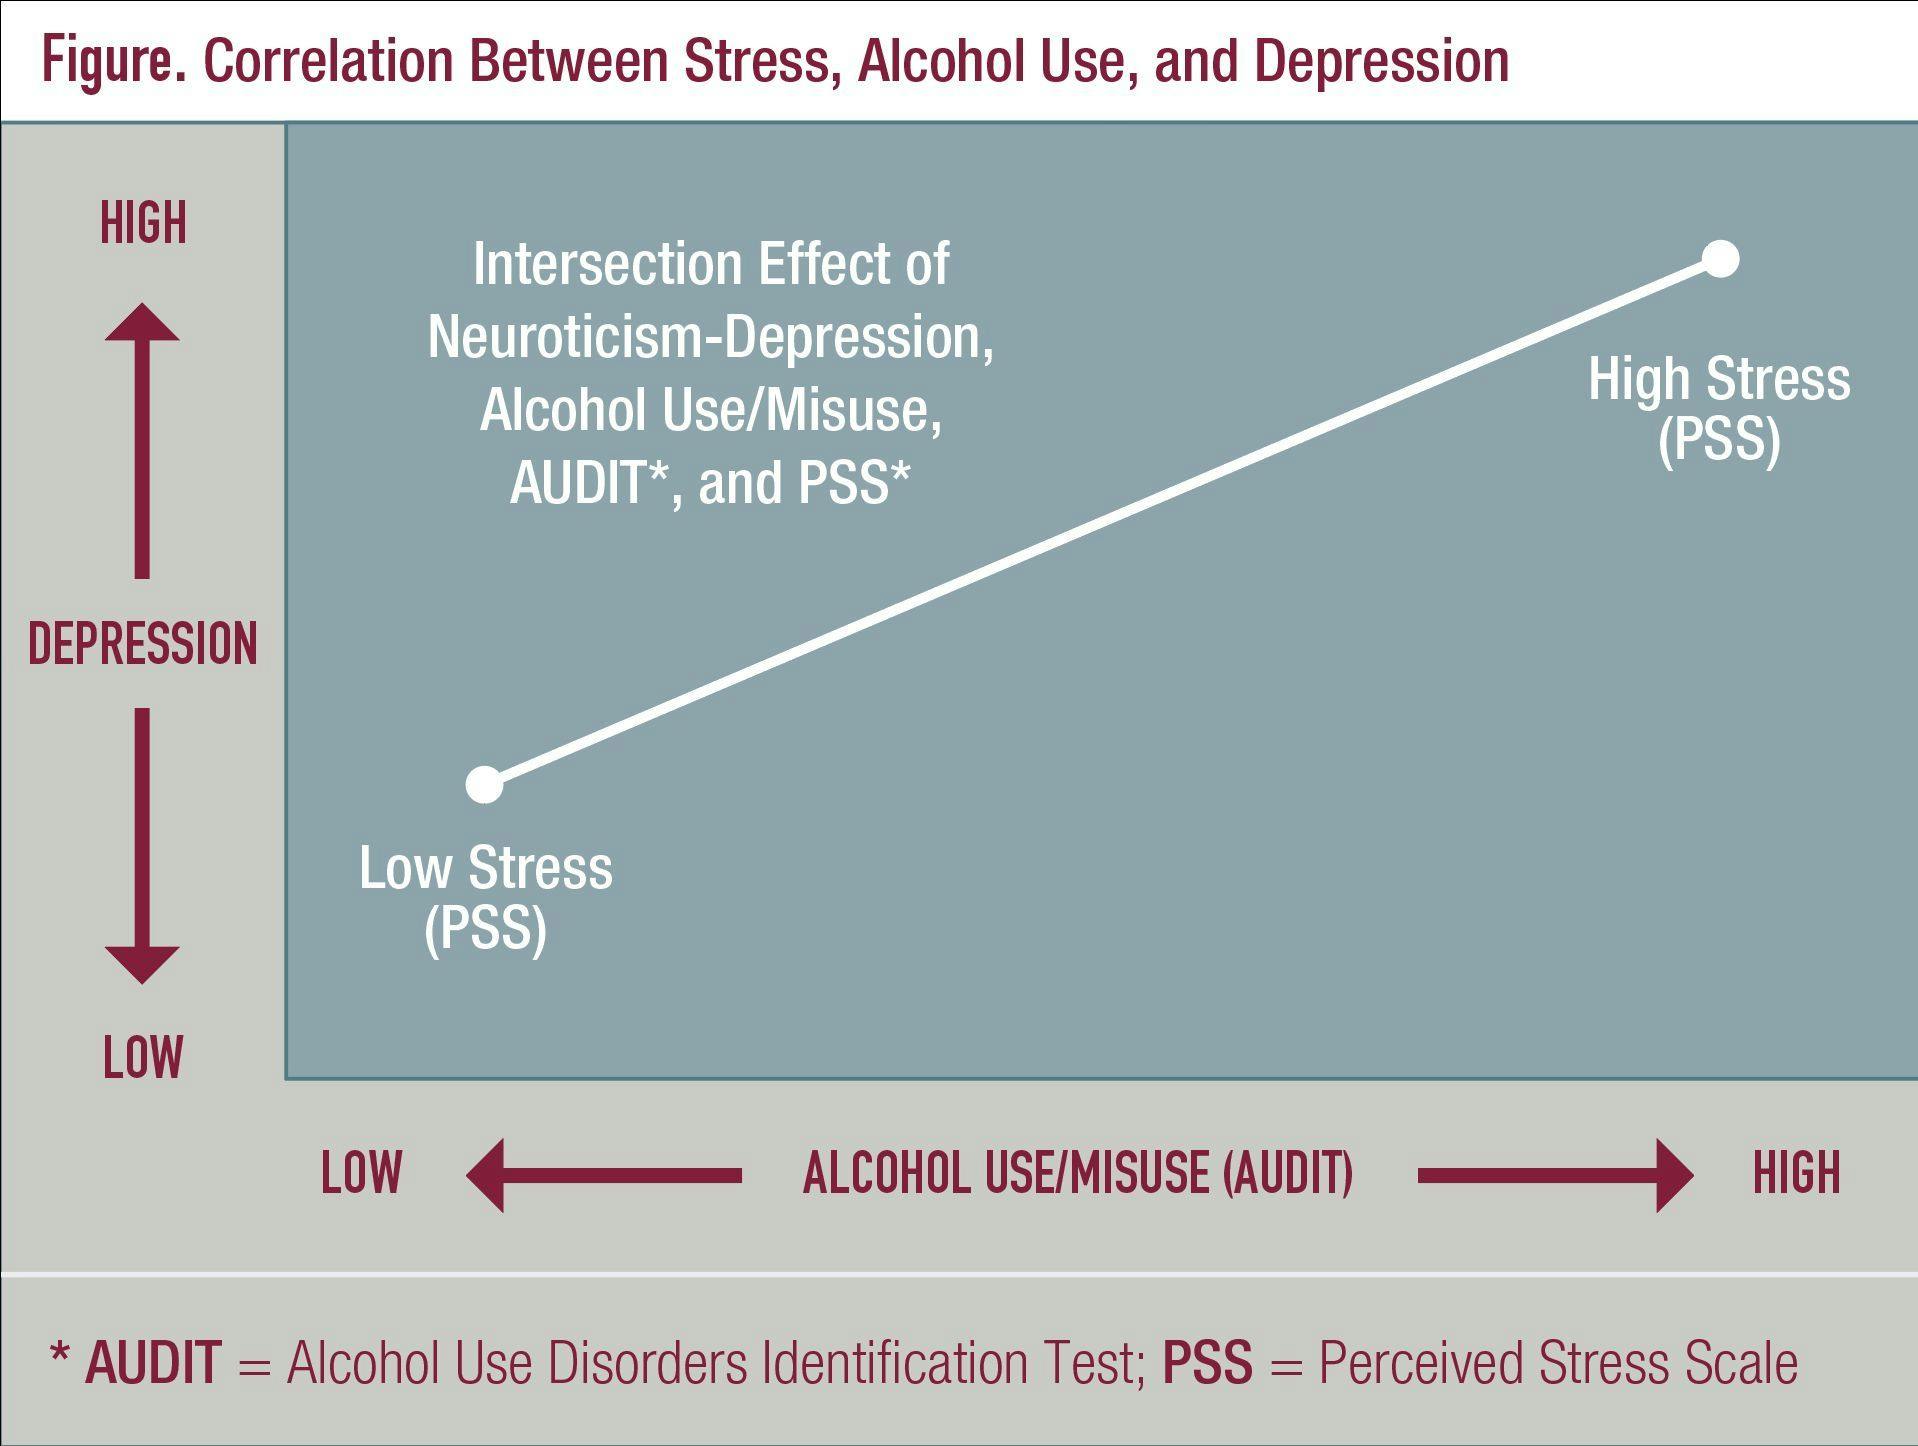 Figure. Correlation Between Stress, Alcohol Use, and Depression